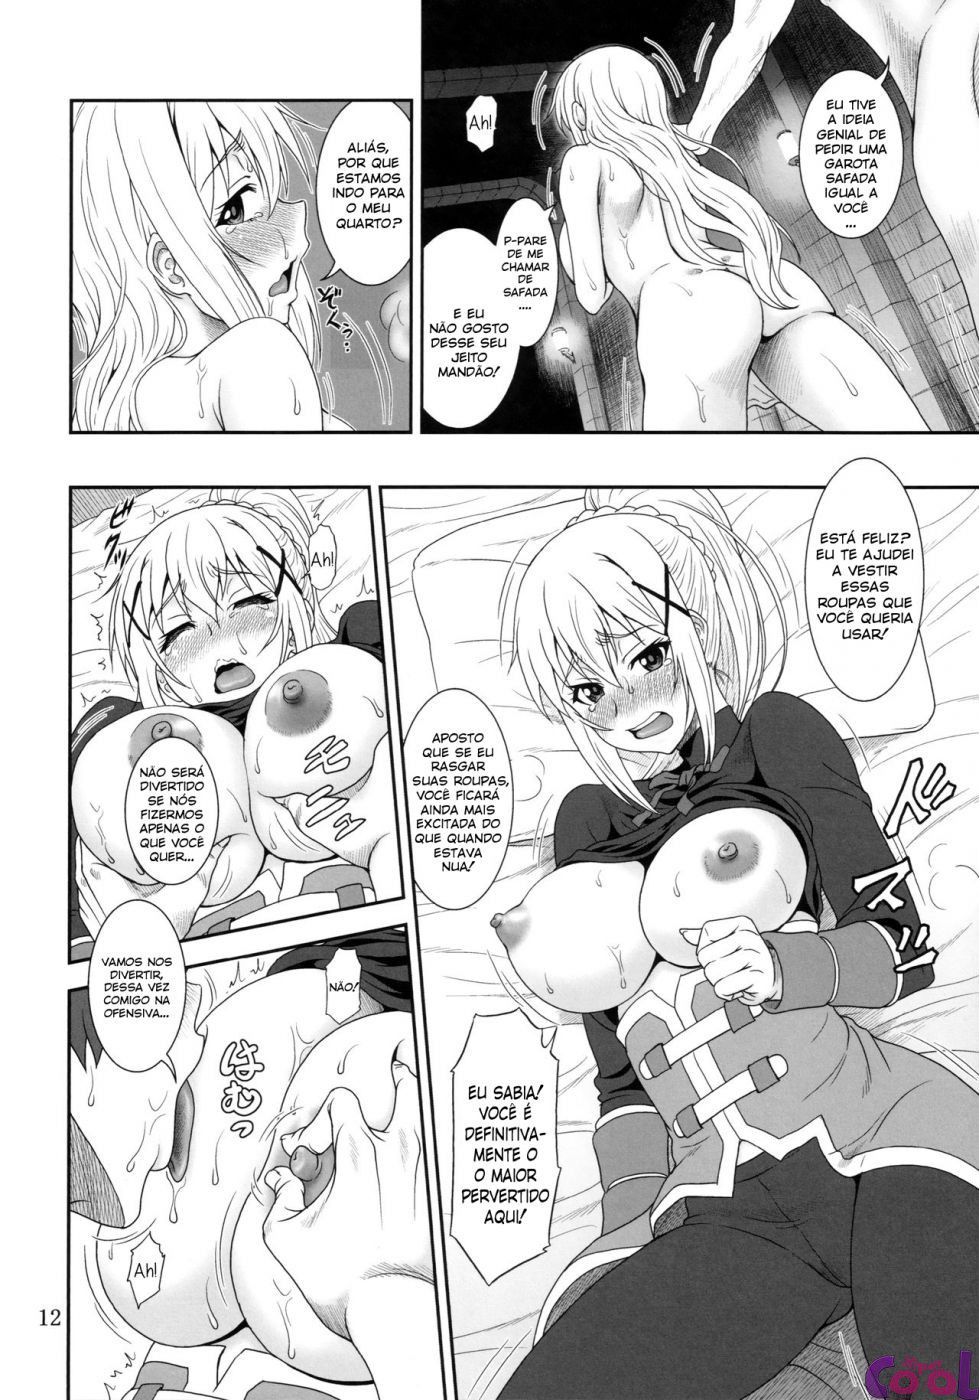 trouble-darkness-chapter-01-page-11.jpg